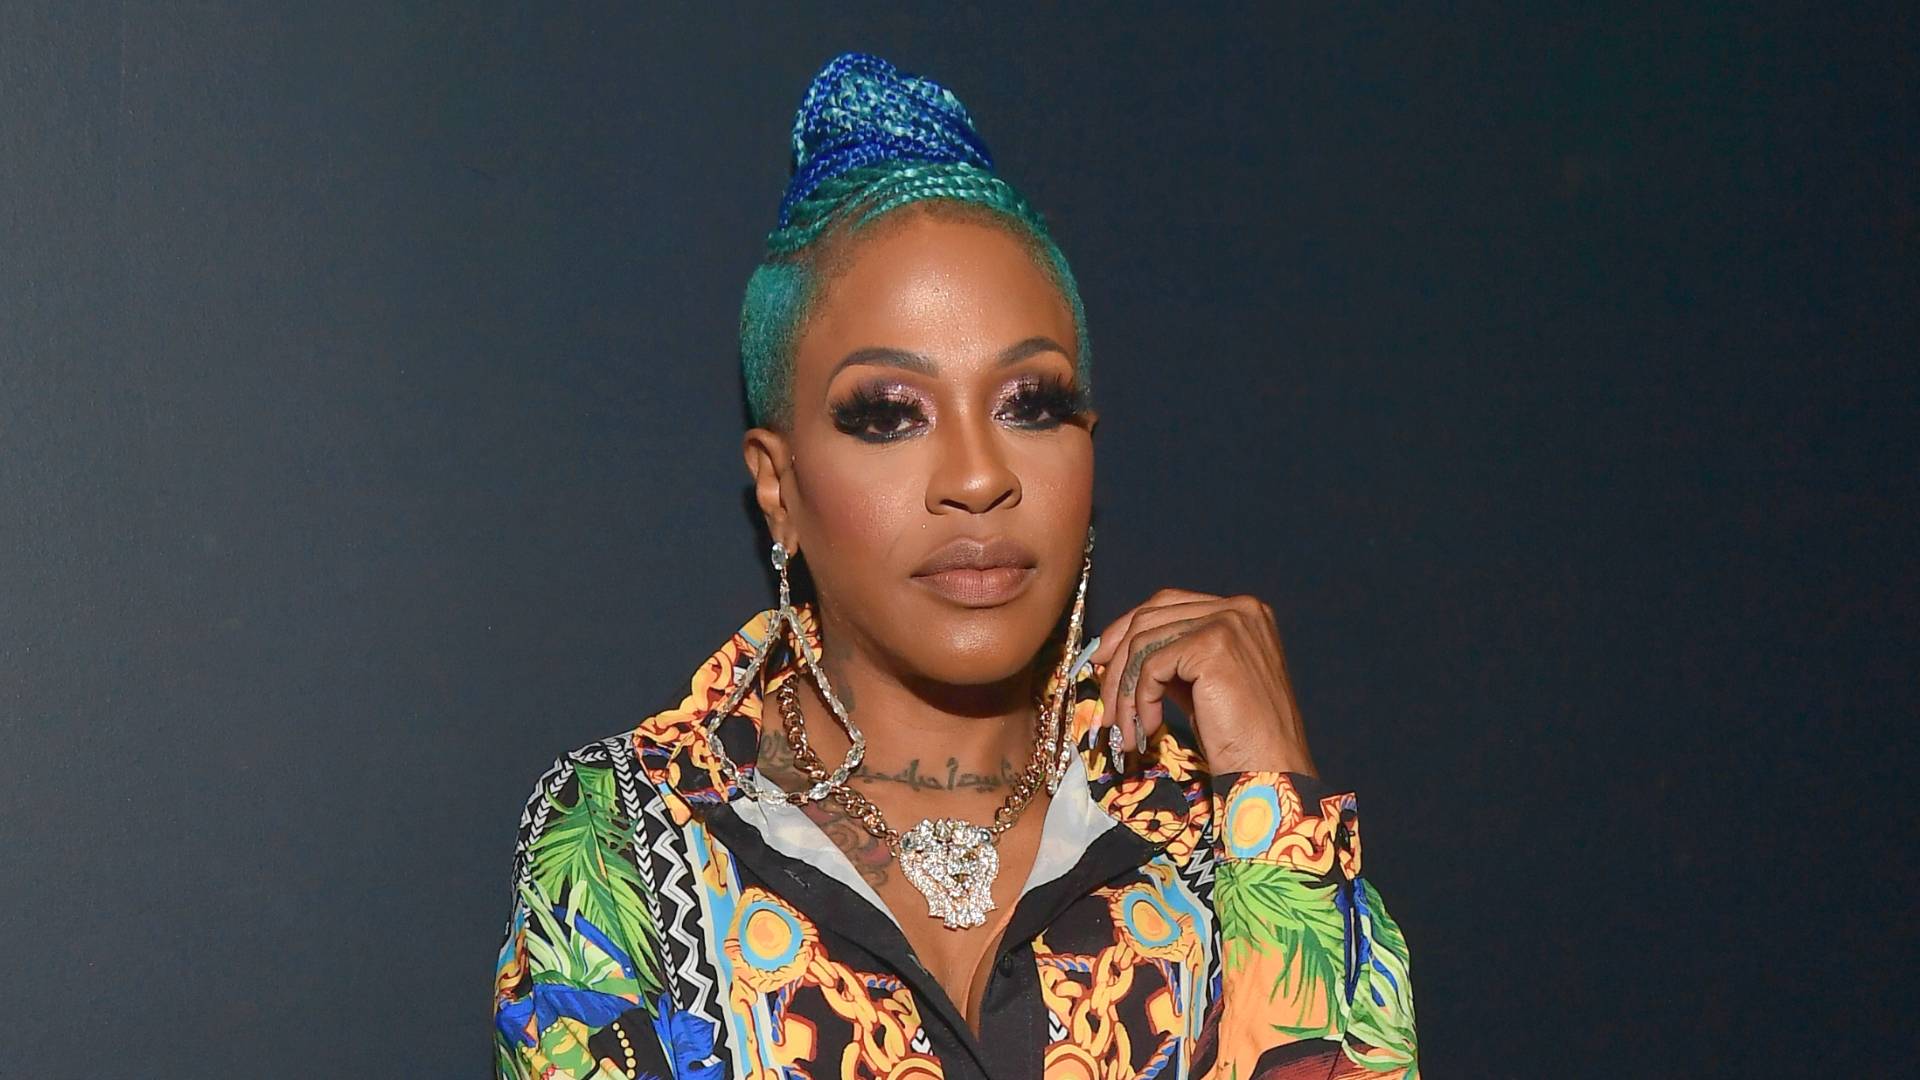 Lil Mo attends Cassette Hosted by Kenny Burns featuring Lil Mo and Noreaga at District Atlanta on June 14, 2019 in Atlanta, Georgia.